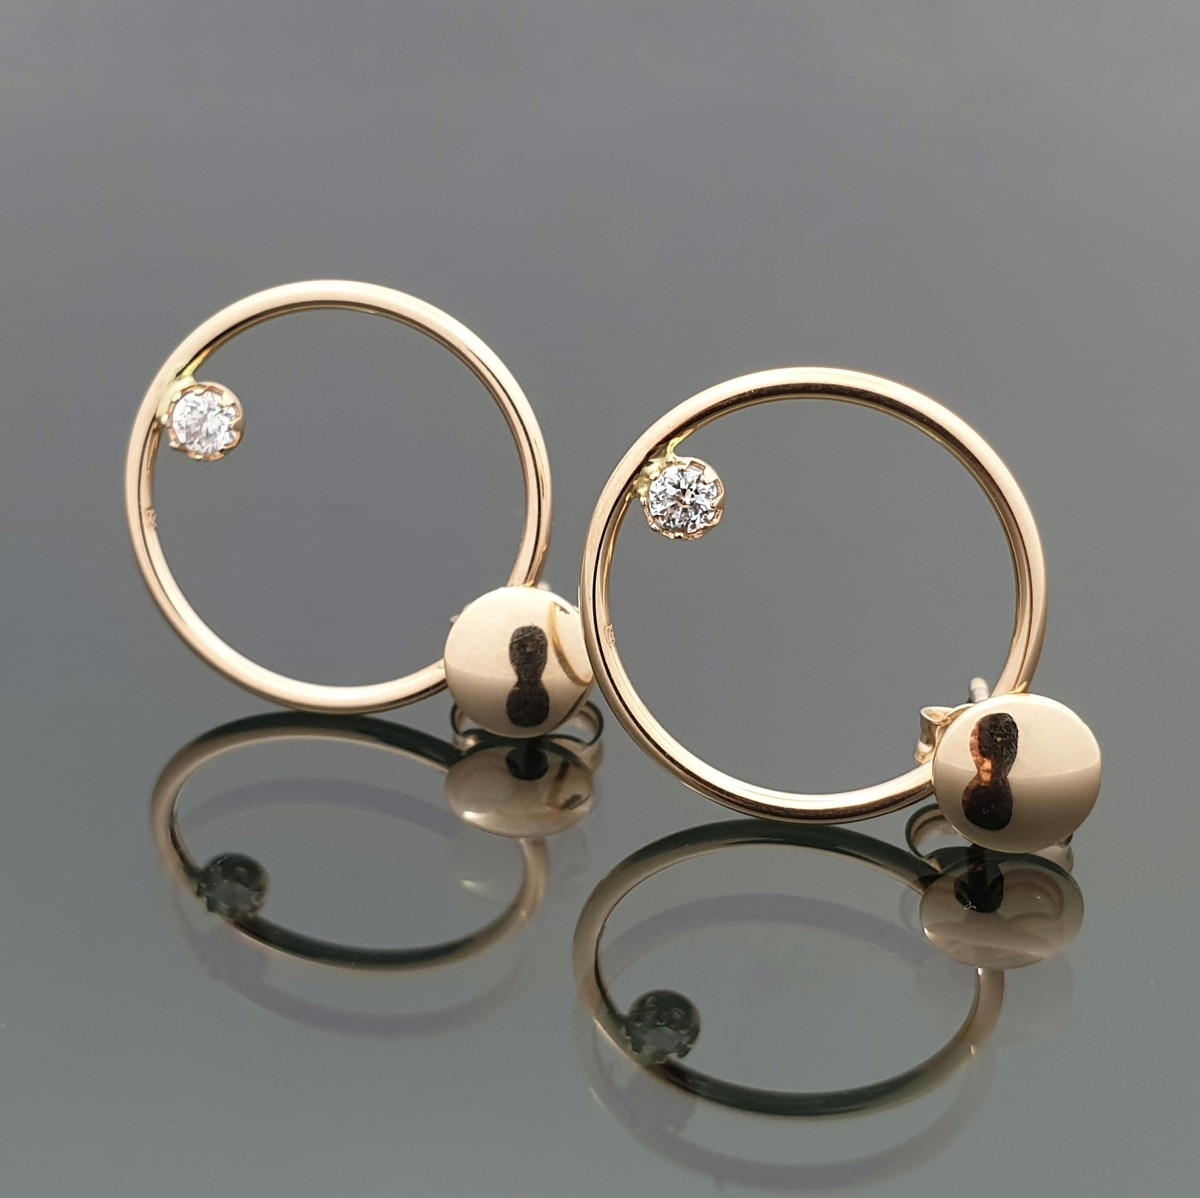  Gold earrings with eyelets (1396)